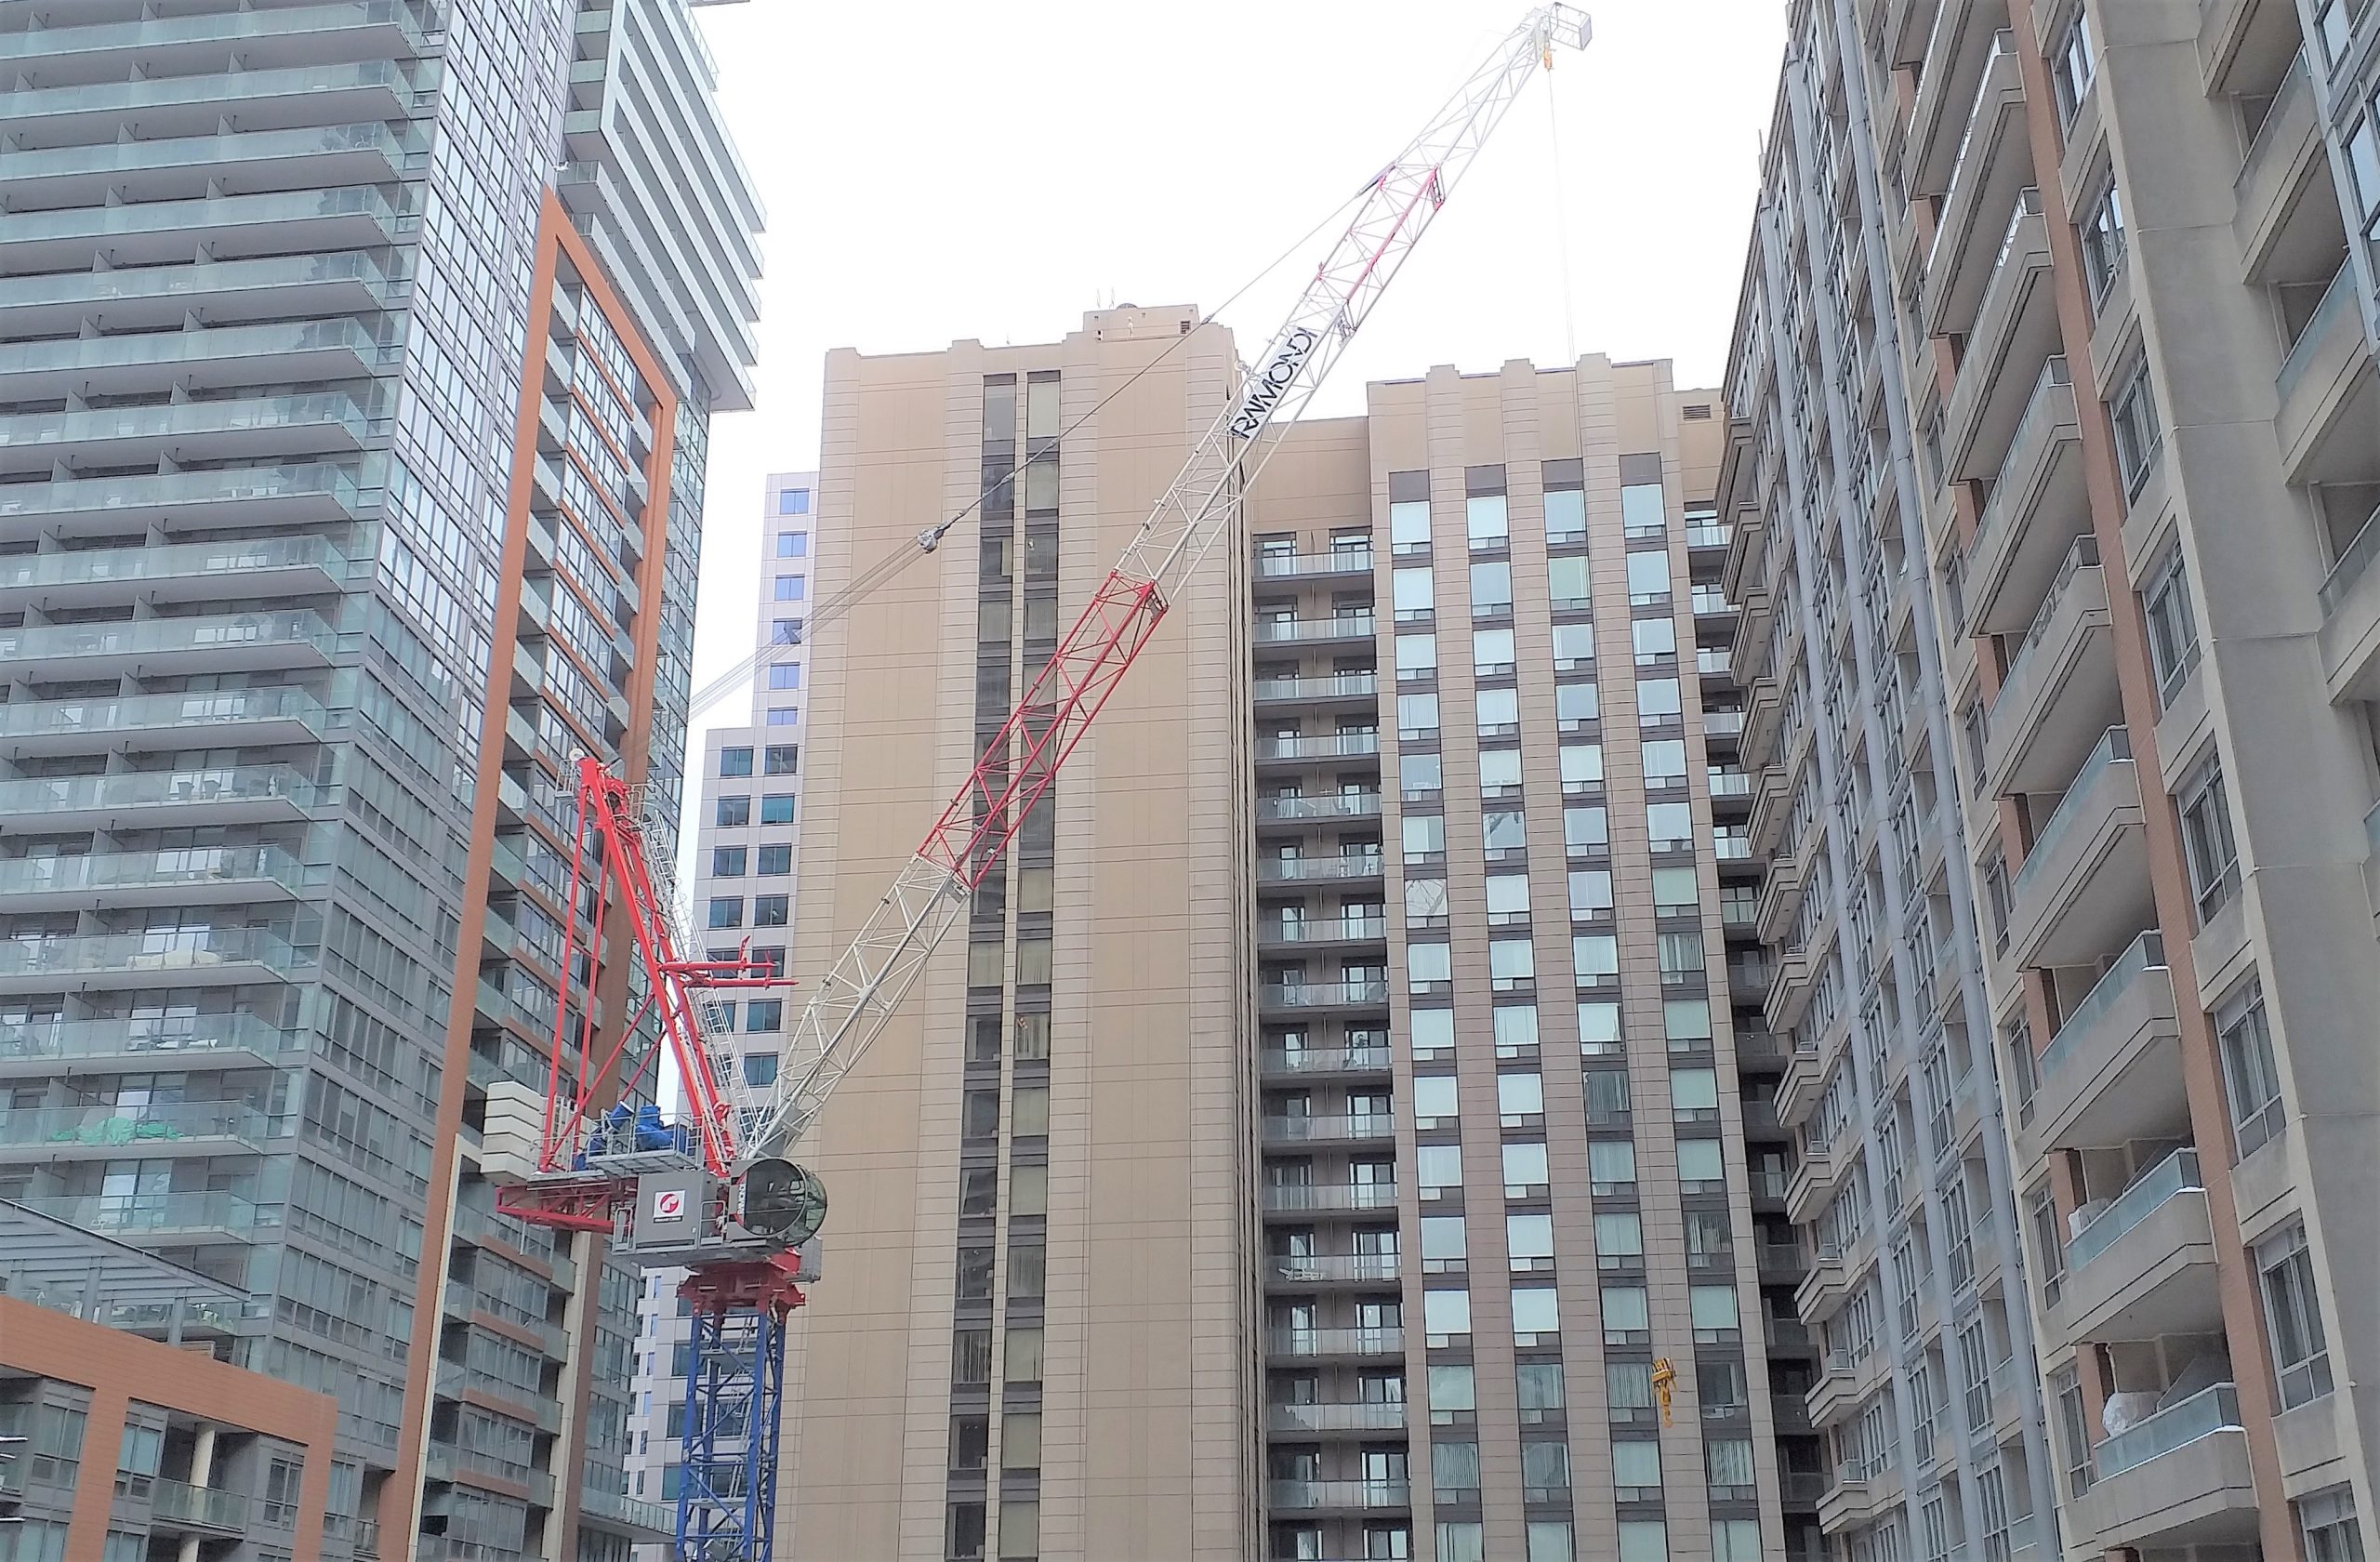 Two new Raimondi LR273 luffing cranes participate in the construction of prestigious residences in downtown Toronto